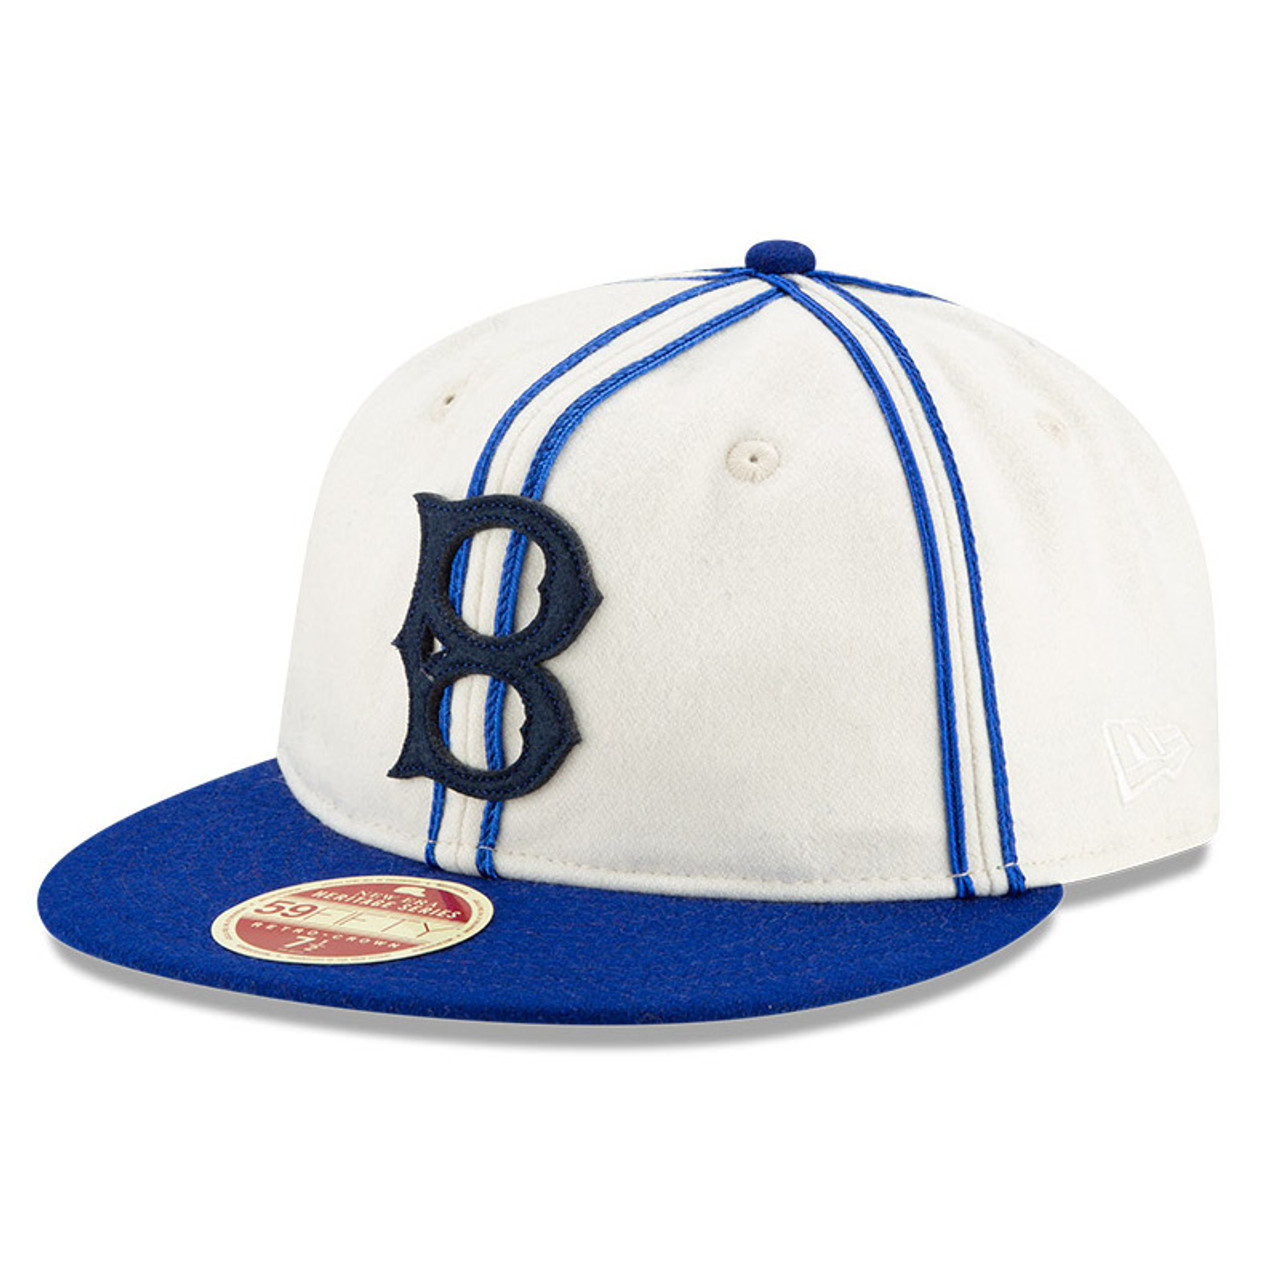 Los Angeles Dodgers New Era Cooperstown Collection Wool 59FIFTY Fitted Hat - Navy, Size: 7 5/8, Blue